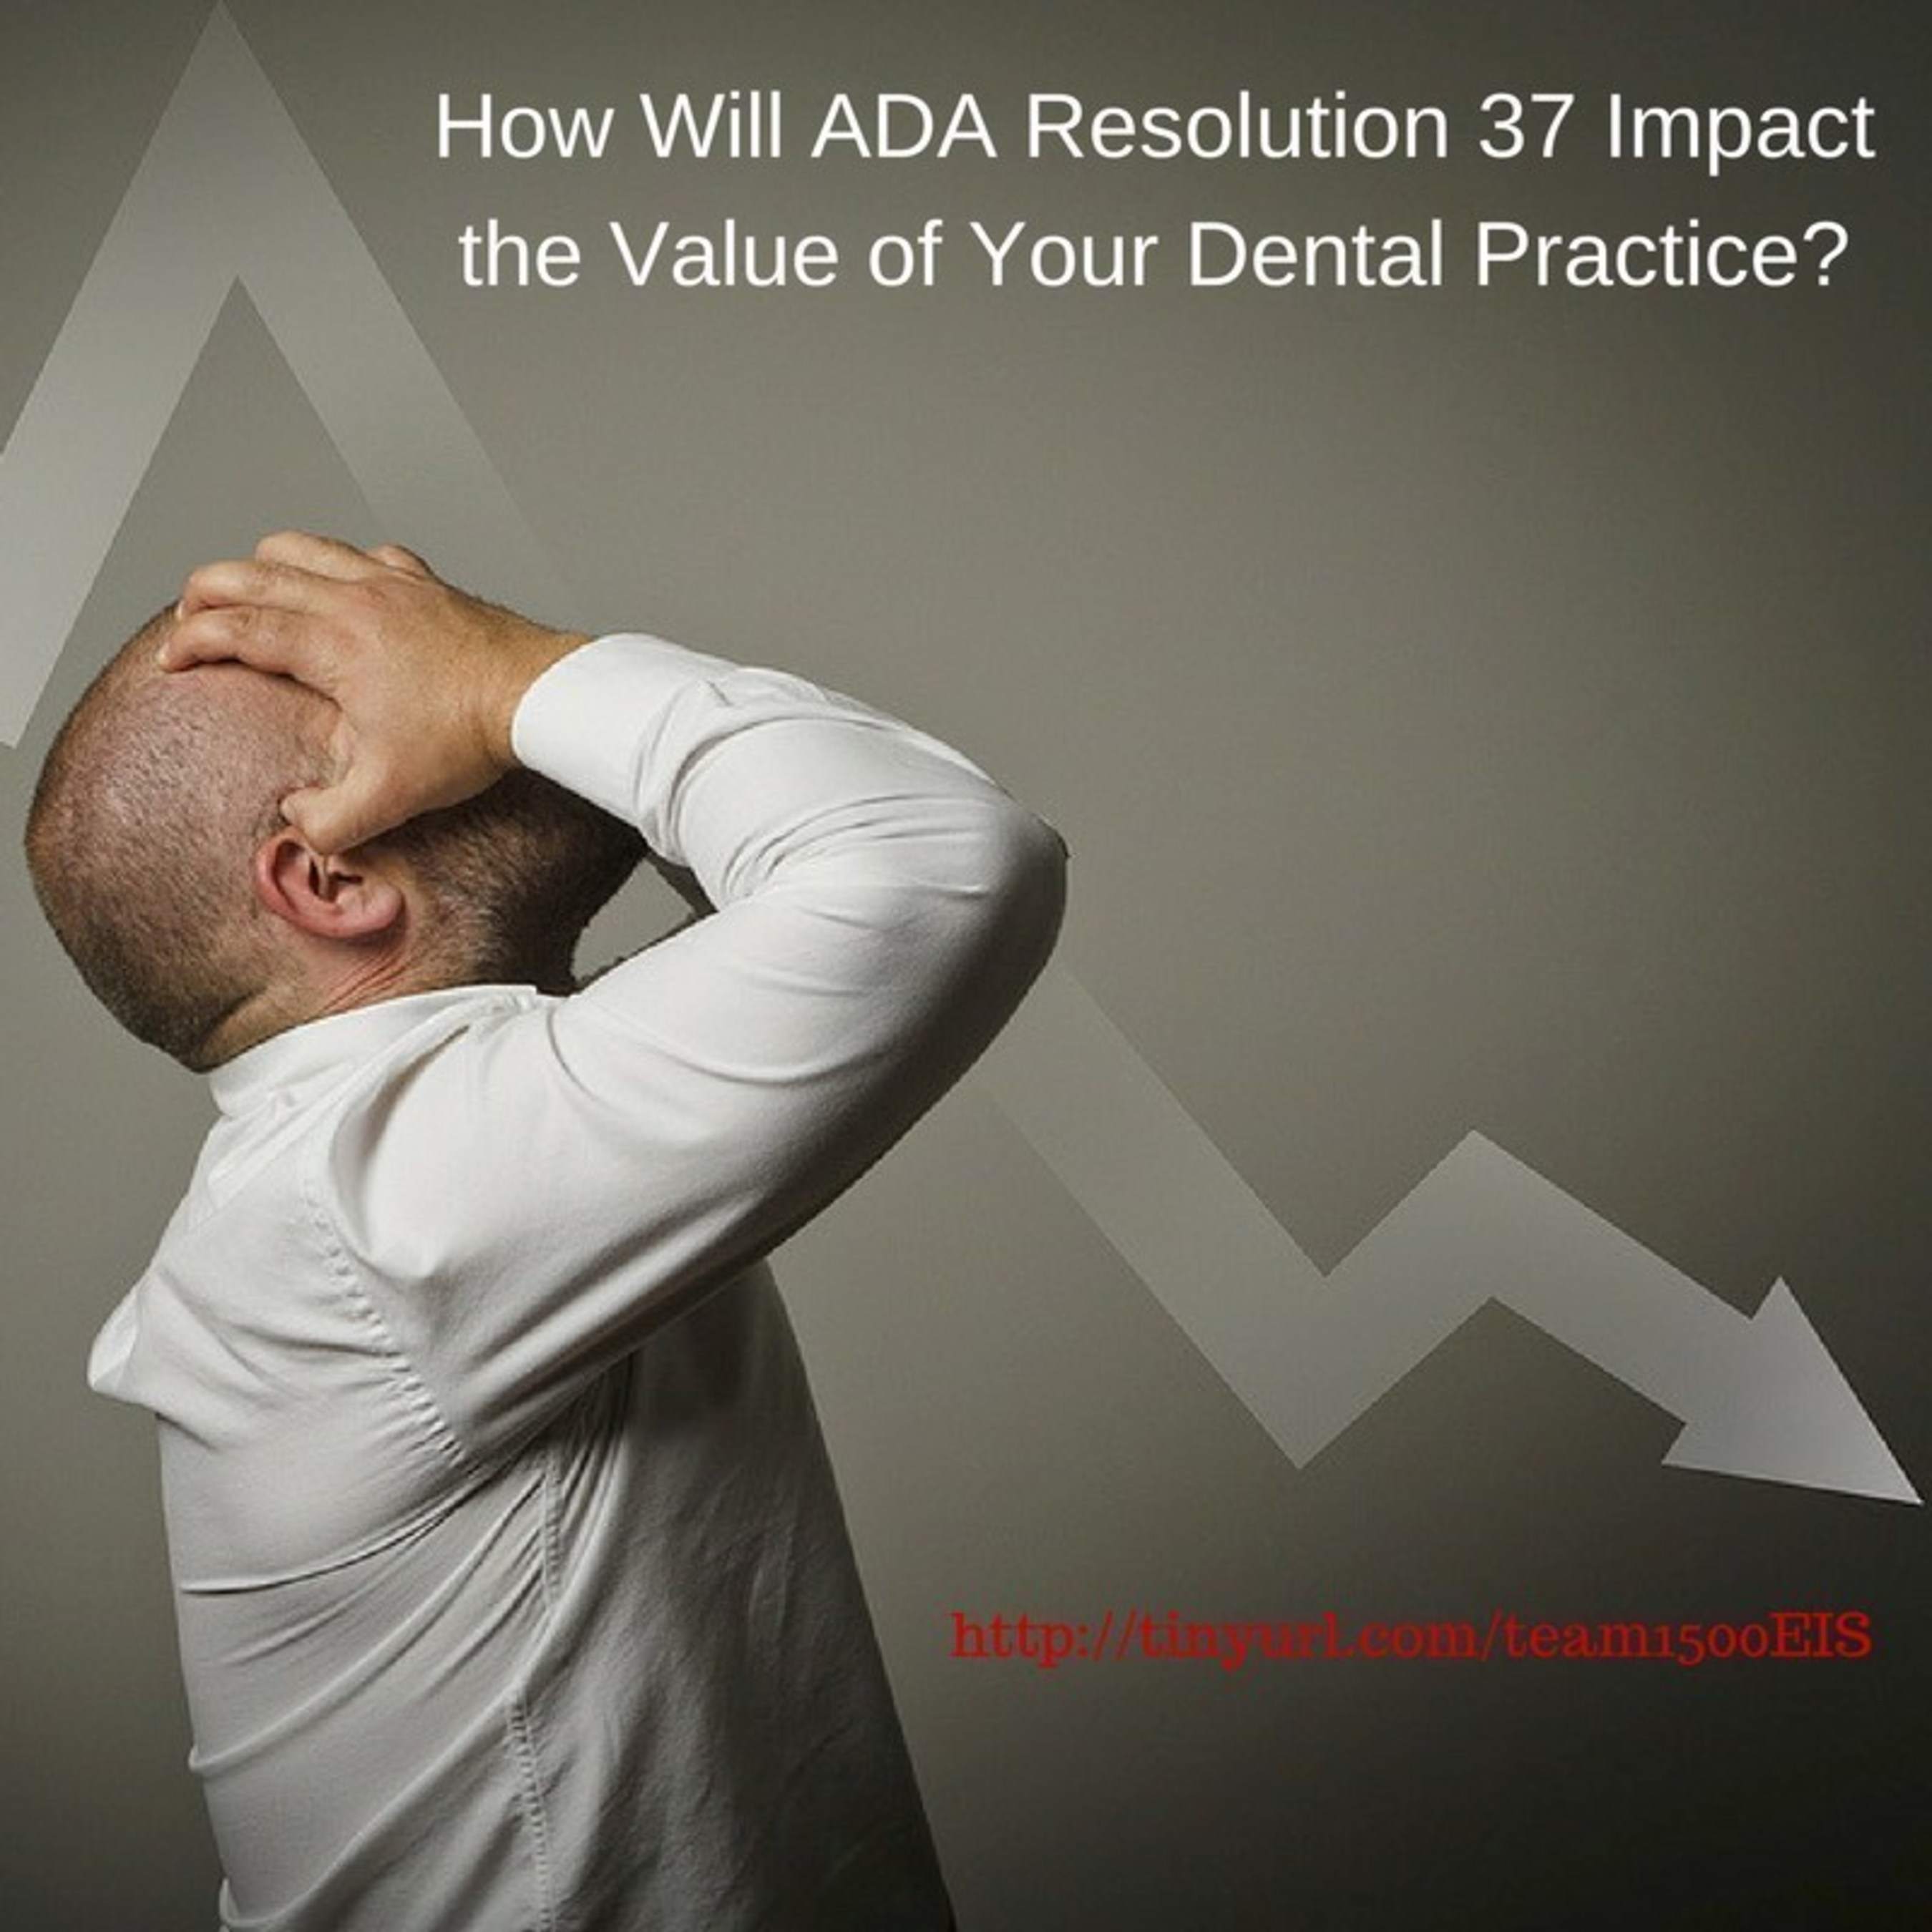 If approved, ADA Resolution 37 will drive many general dentists out of practice altogether.